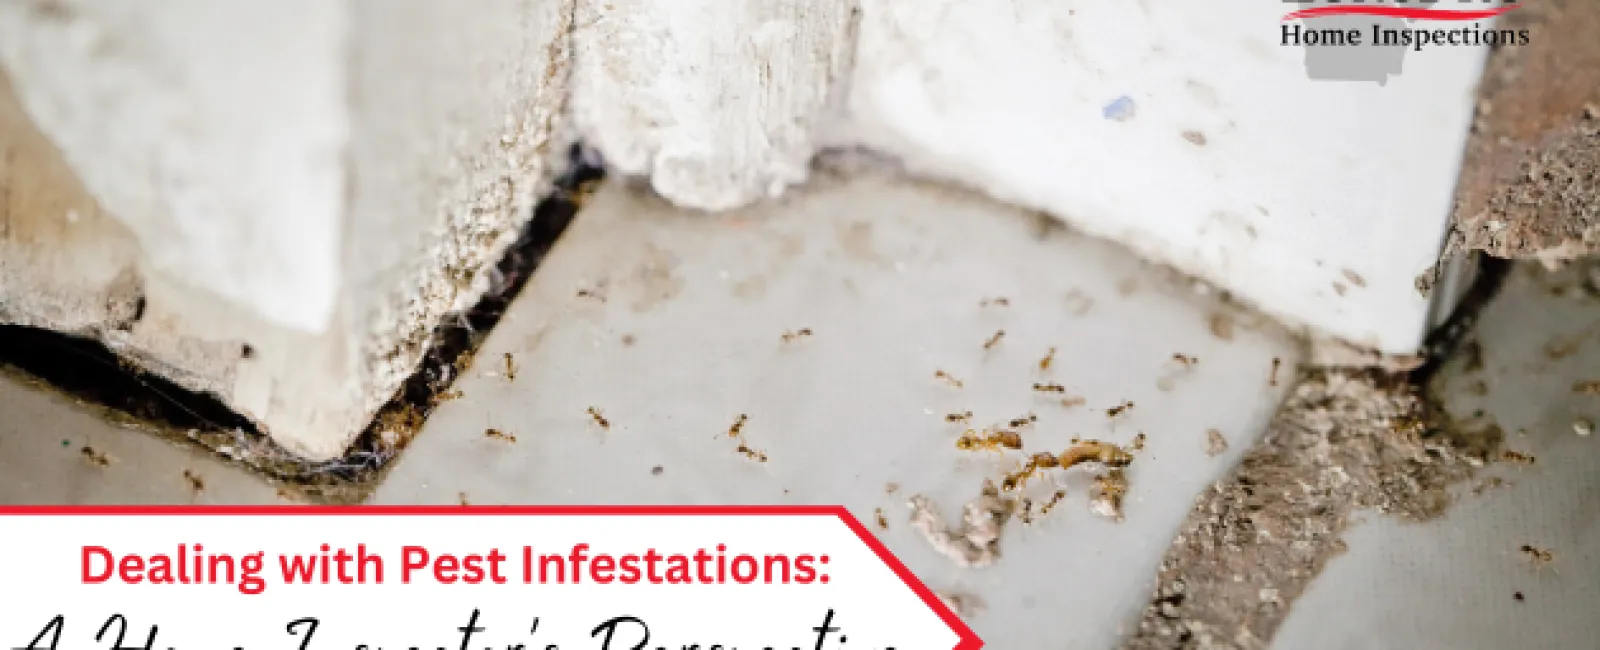 Dealing with Pest Infestations: A Home Inspector's Perspective